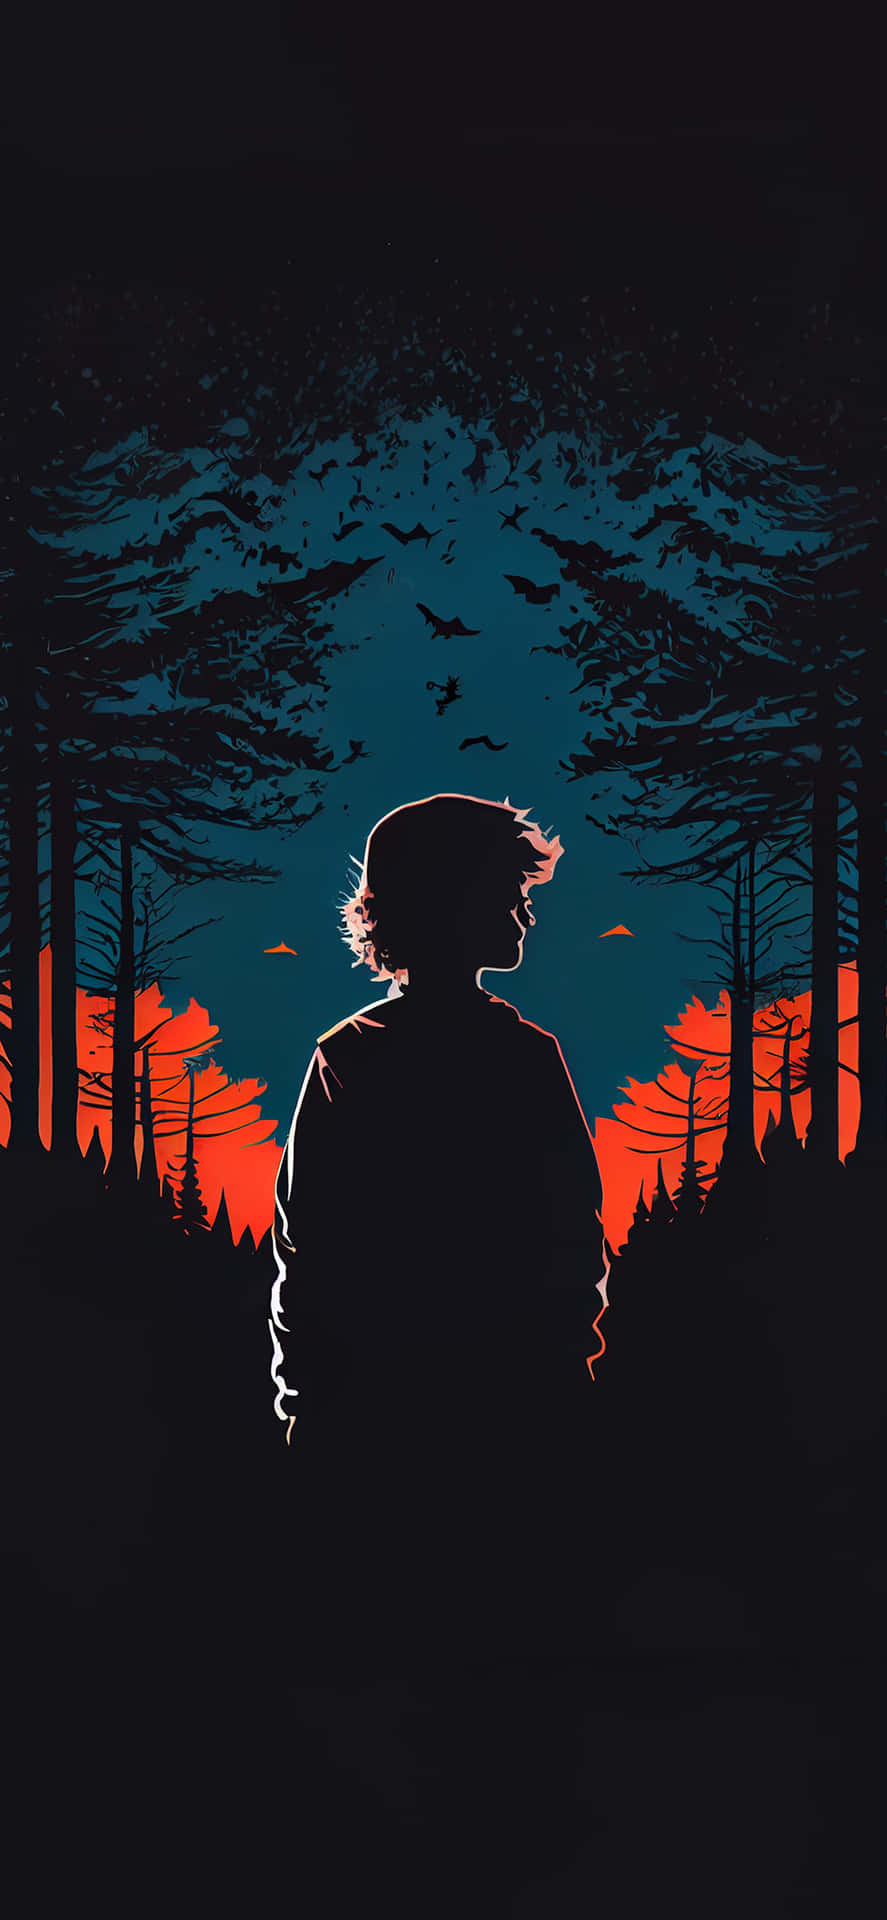 A Silhouette Of A Person Standing In The Woods